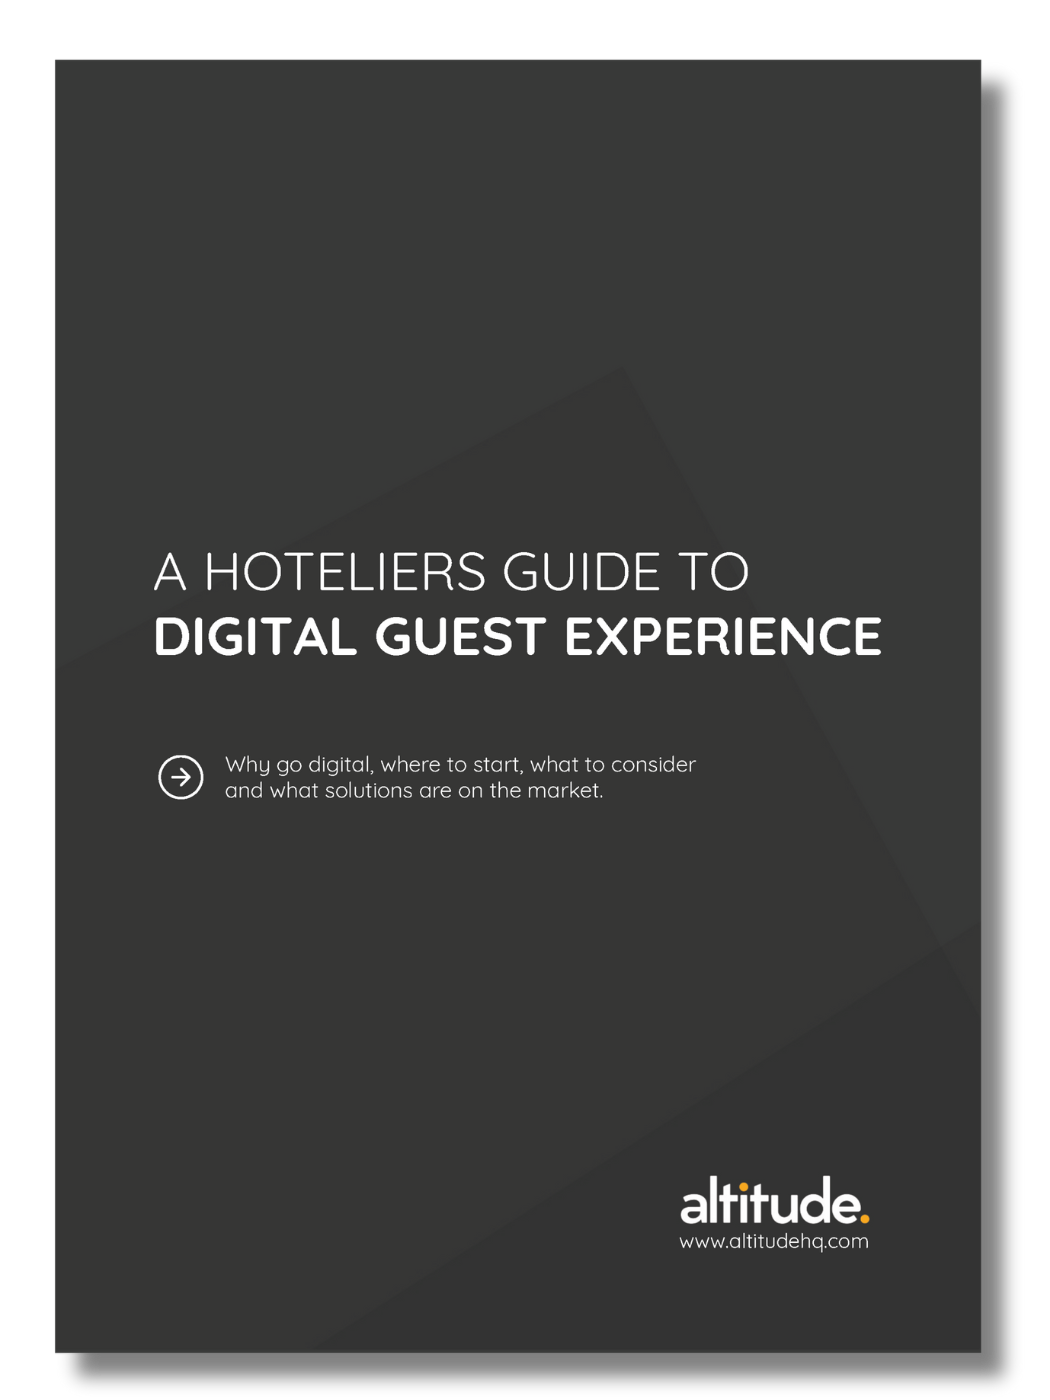 A Hoteliers Guide to Digital Guest Experience